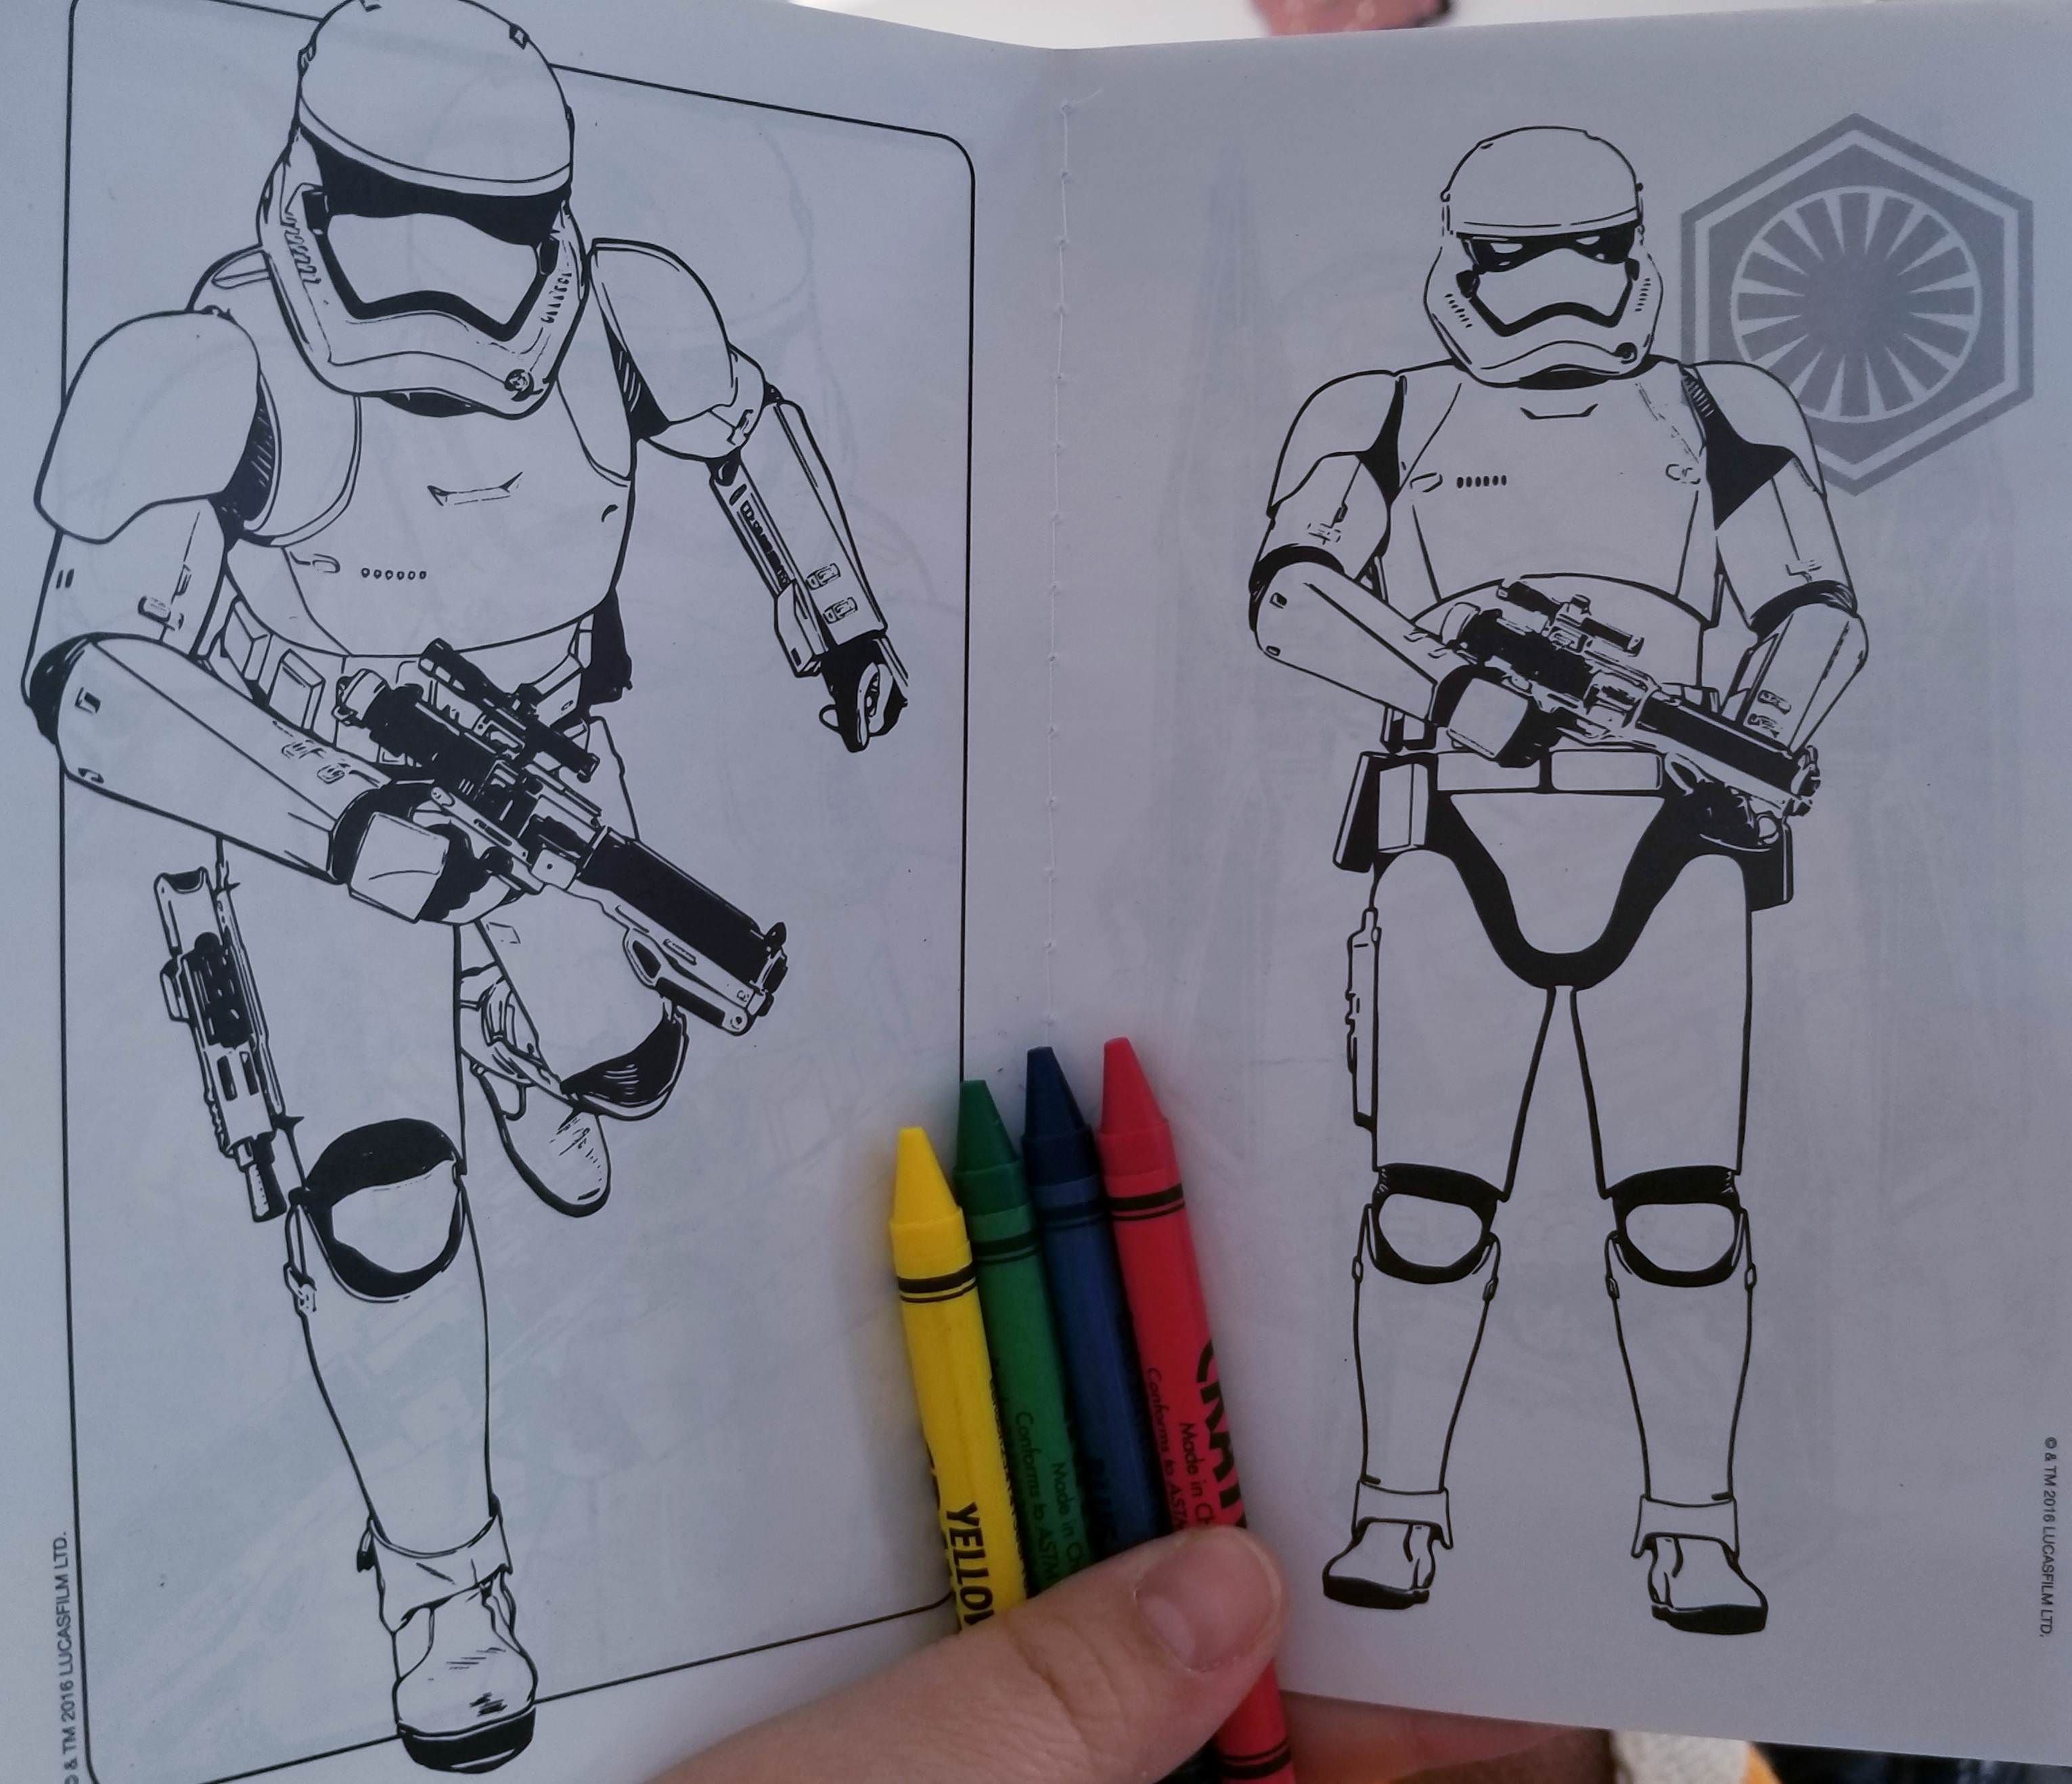 This coloring book...